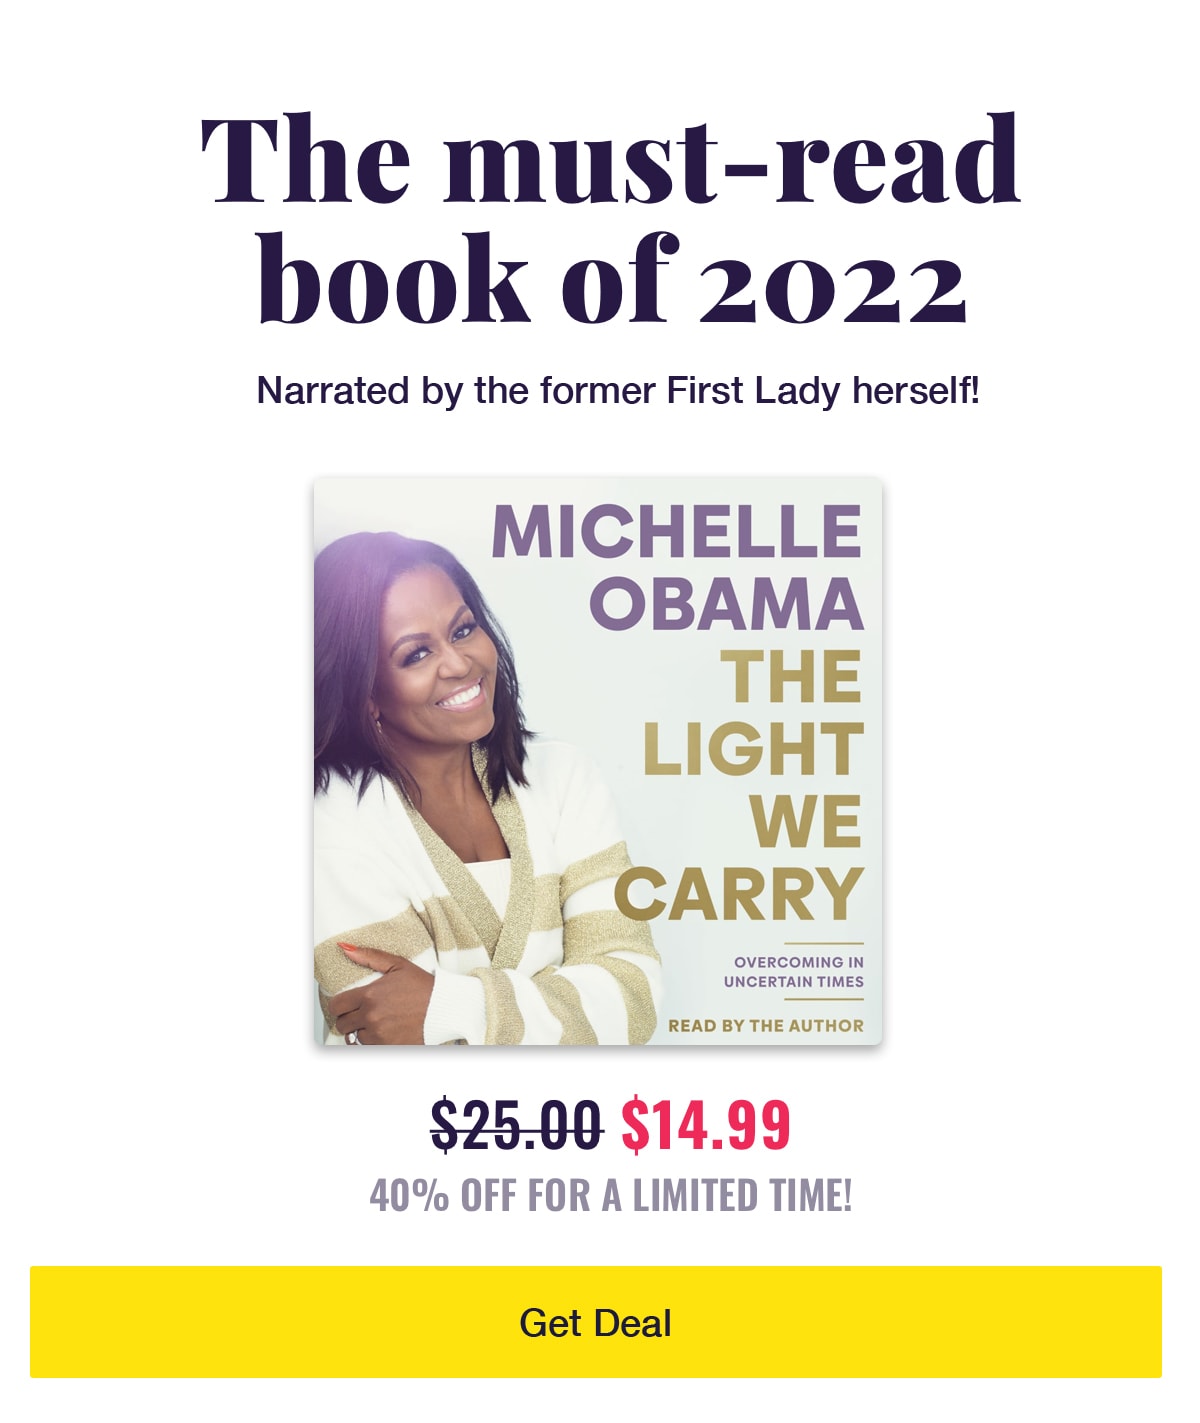 The must-read book of 2022, narrated by the former First Lady herself: The Light We Carry by Michelle Obama. $14.99 – 40% off for a limited time!